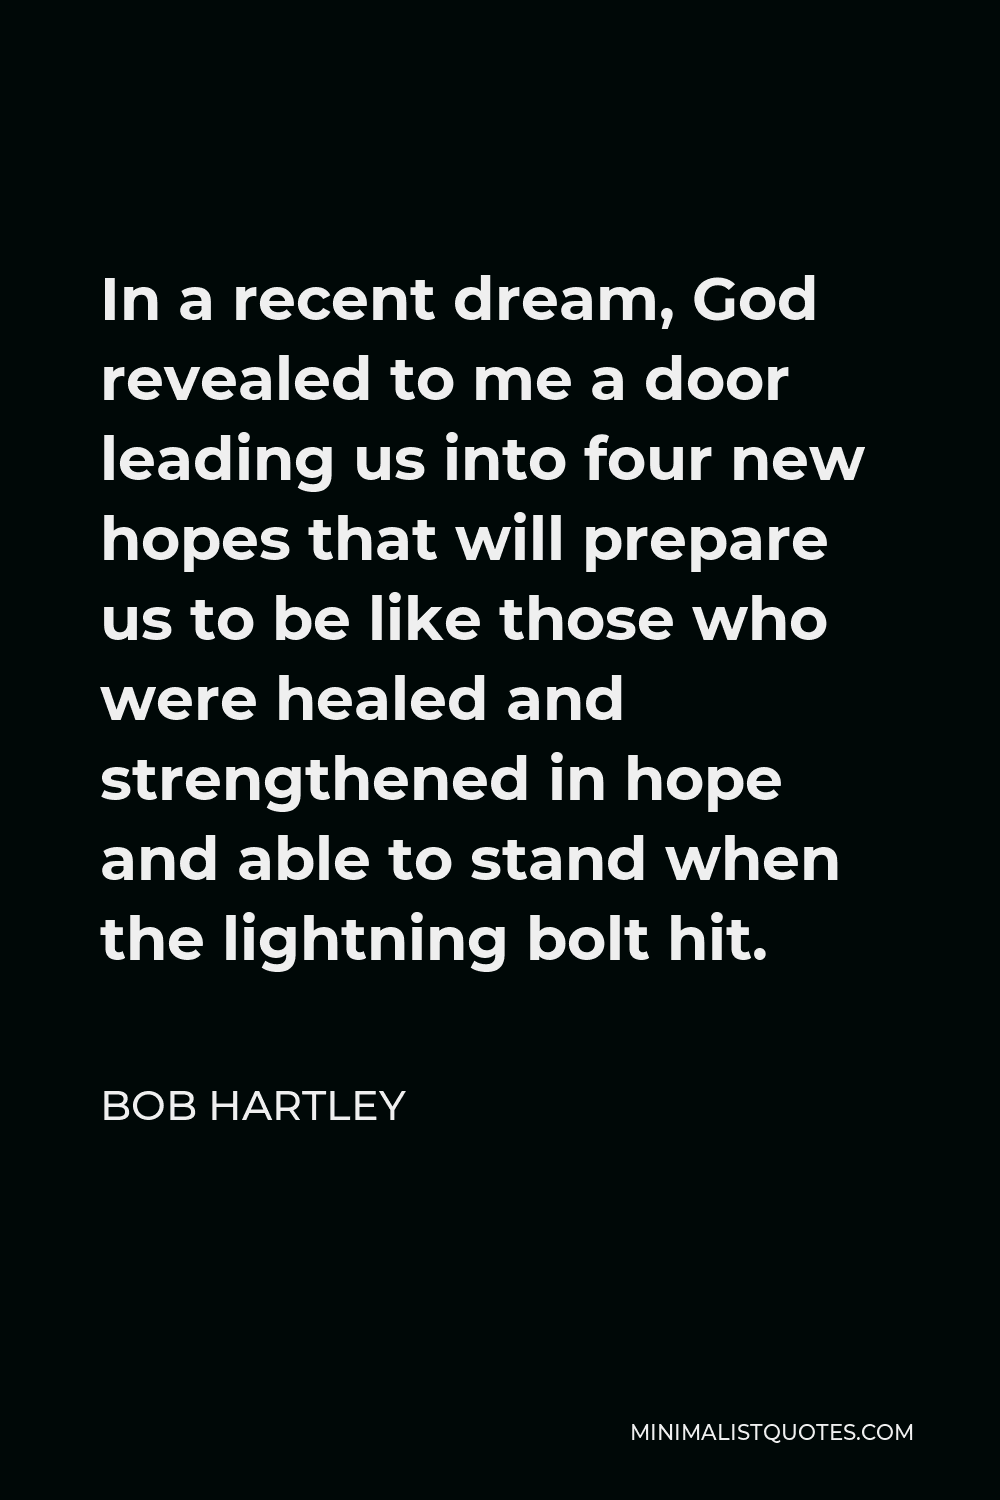 Bob Hartley Quote - In a recent dream, God revealed to me a door leading us into four new hopes that will prepare us to be like those who were healed and strengthened in hope and able to stand when the lightning bolt hit.